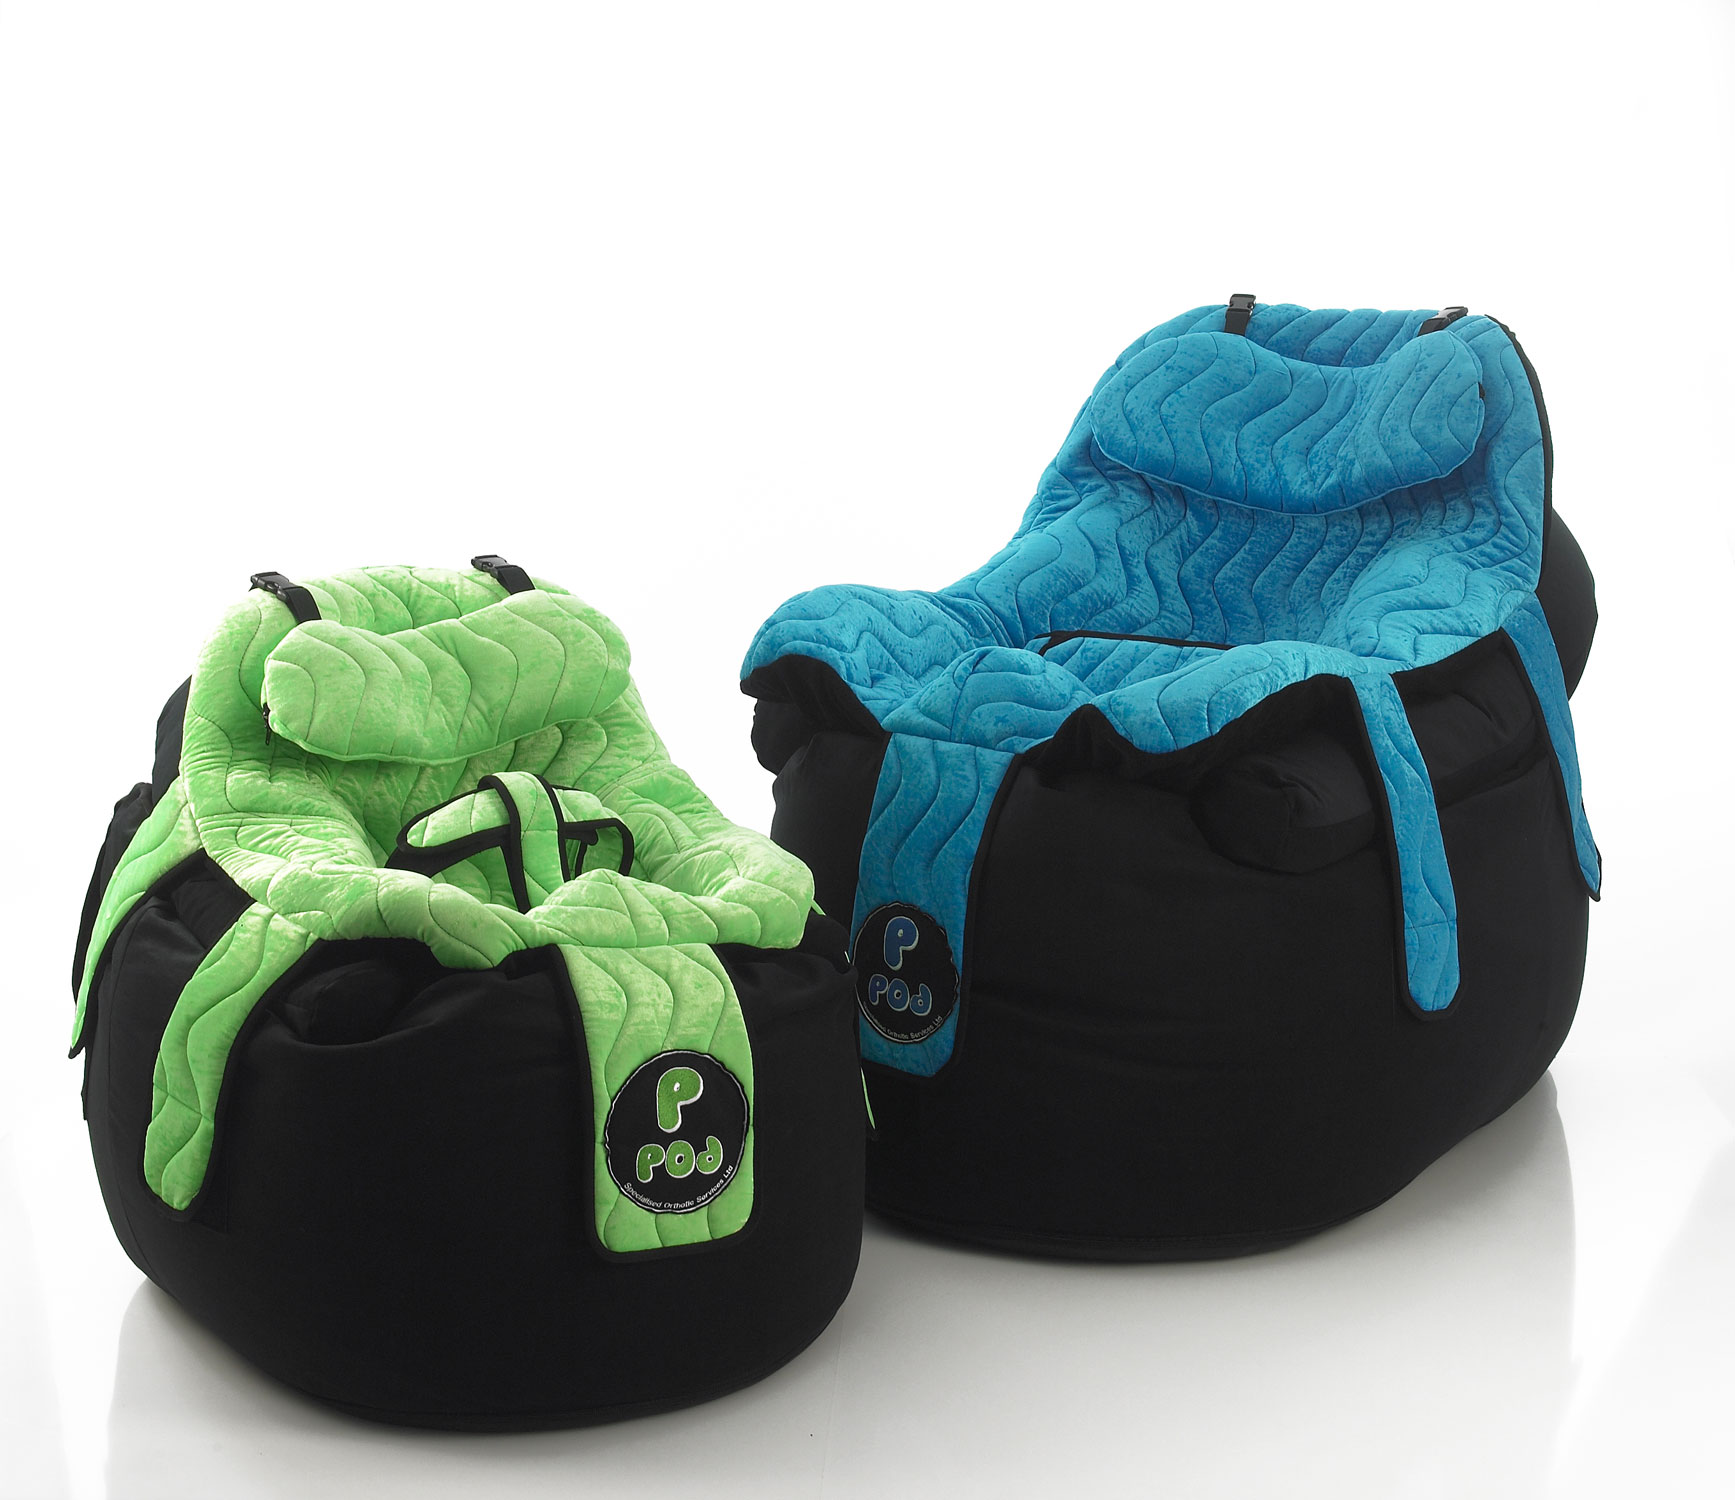 P Pod Bean Bag With Postural Support